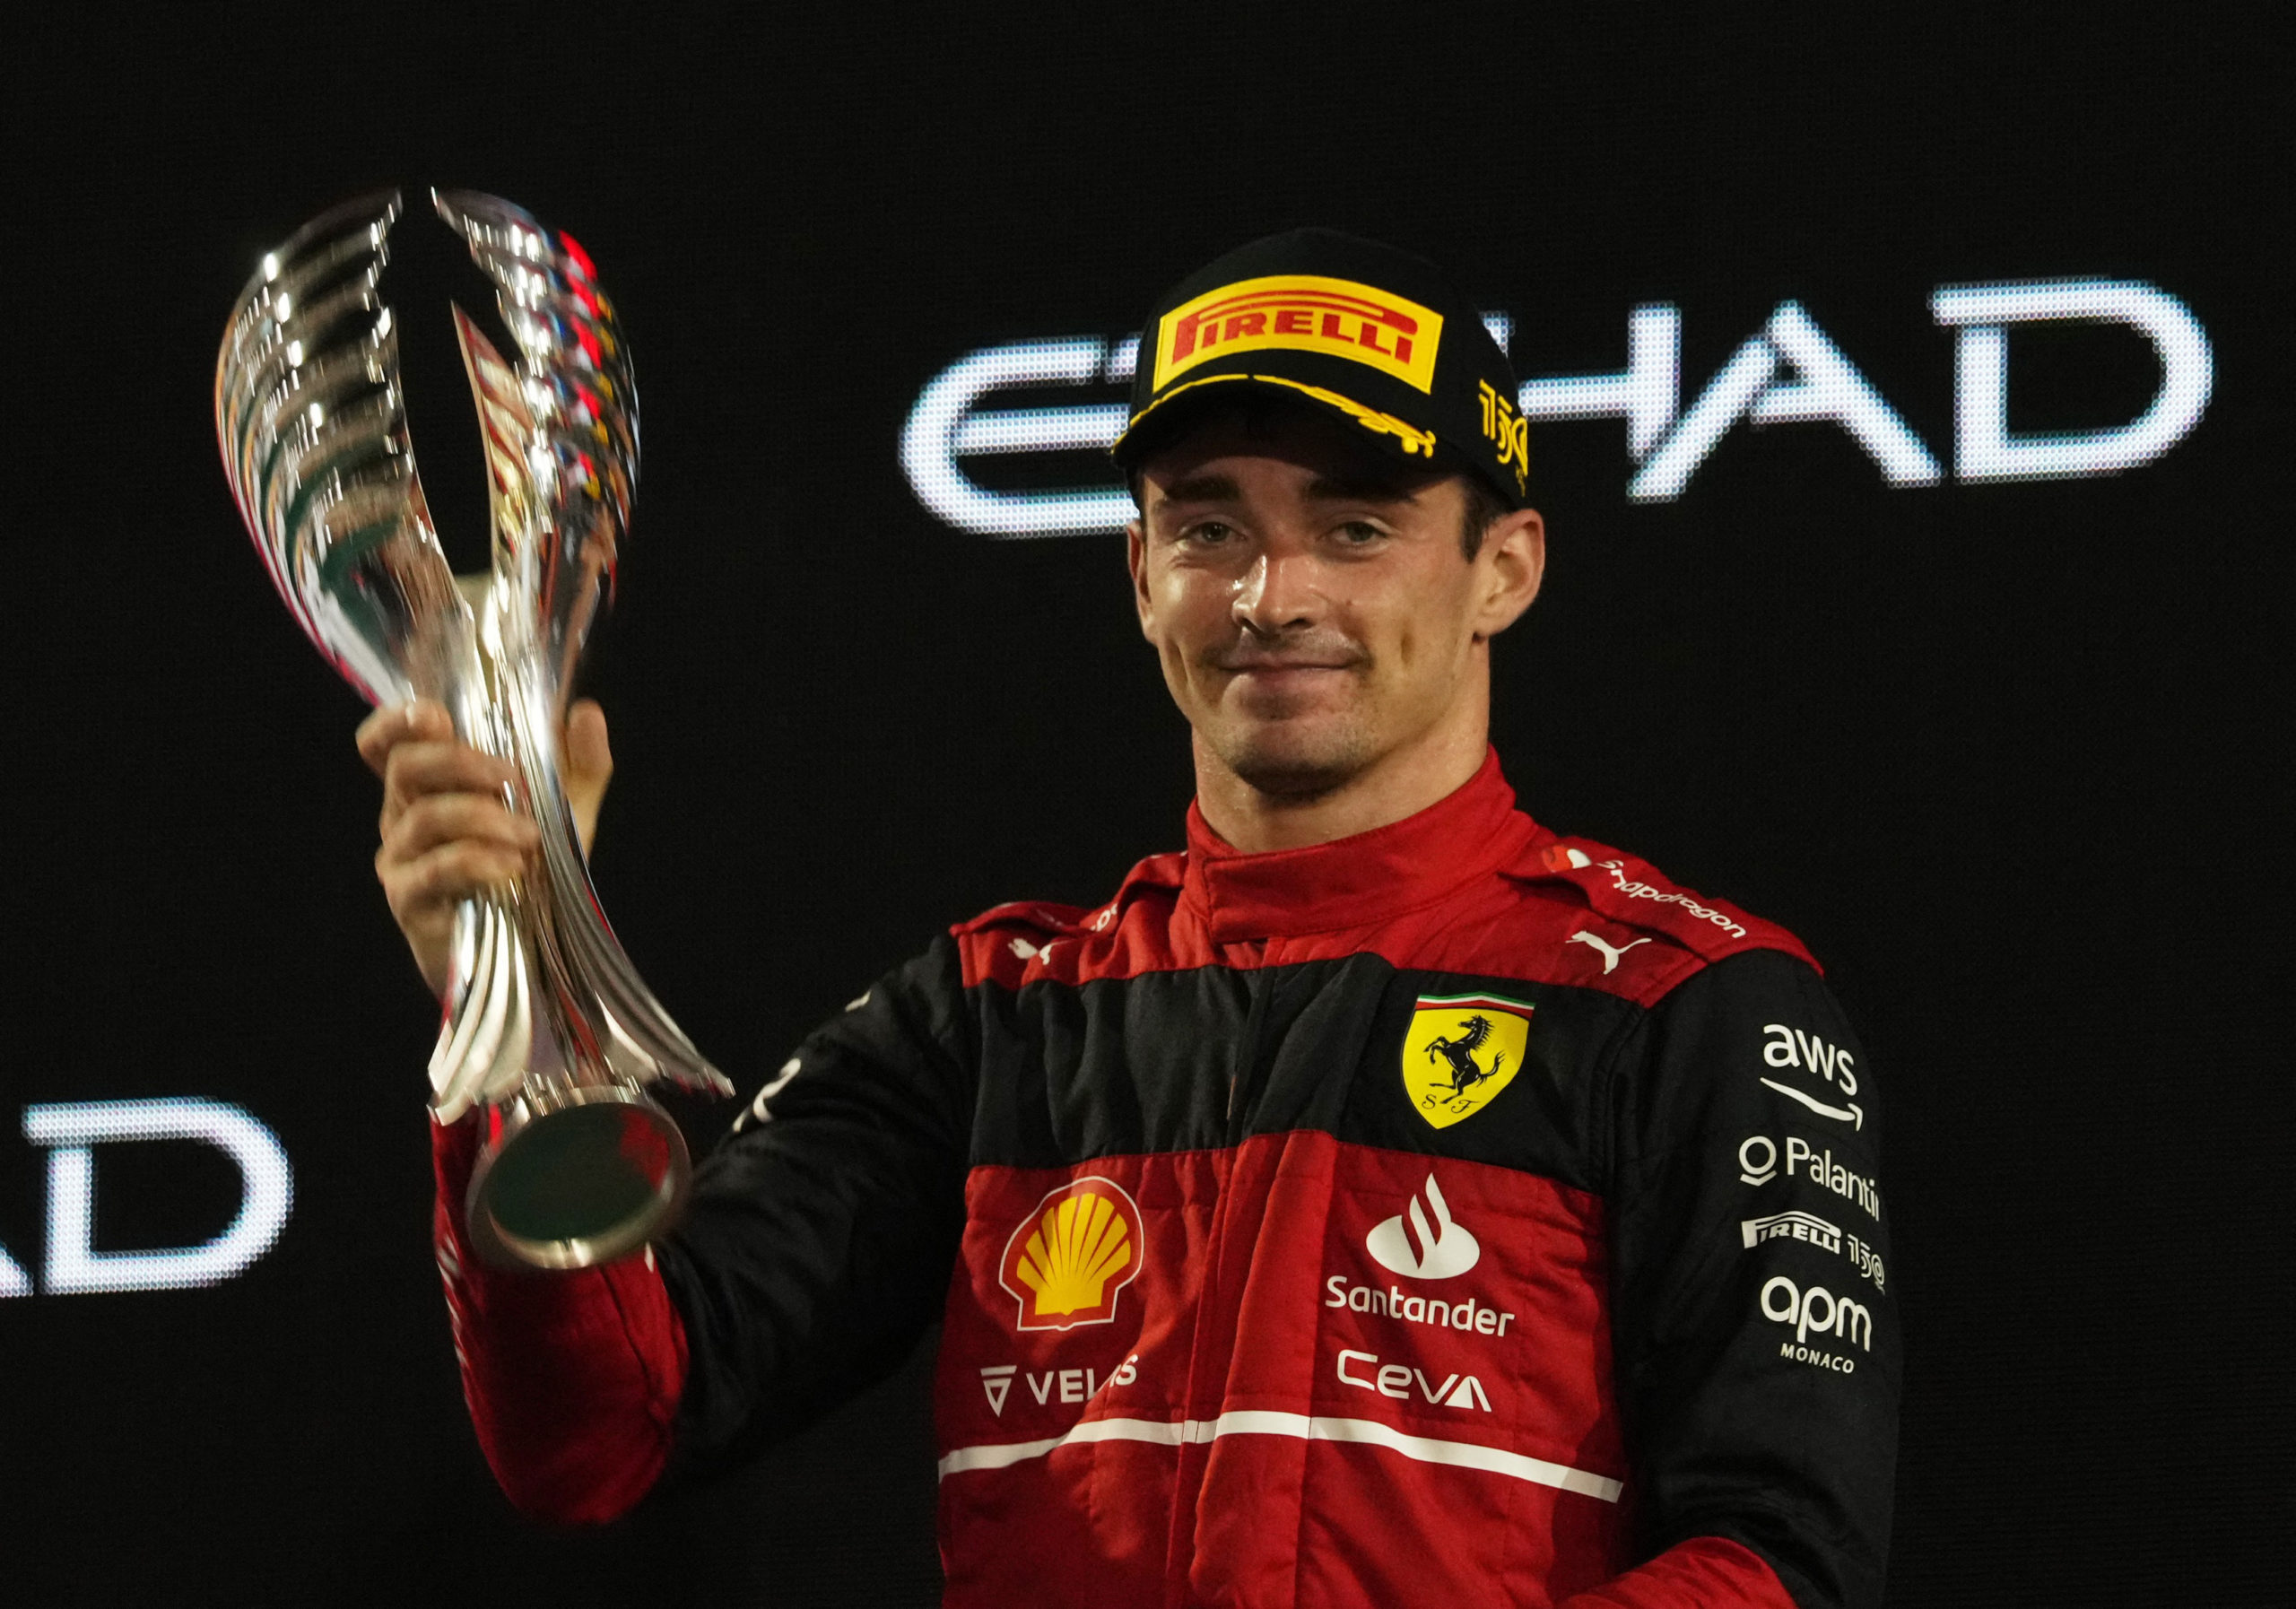 d Prix - Yas Marina Circuit, Abu Dhabi, United Arab Emirates - November 20, 2022 Ferrari's Charles Leclerc celebrates with a trophy on the podium after finishing in second place in the Abu Dhabi Grand Prix 